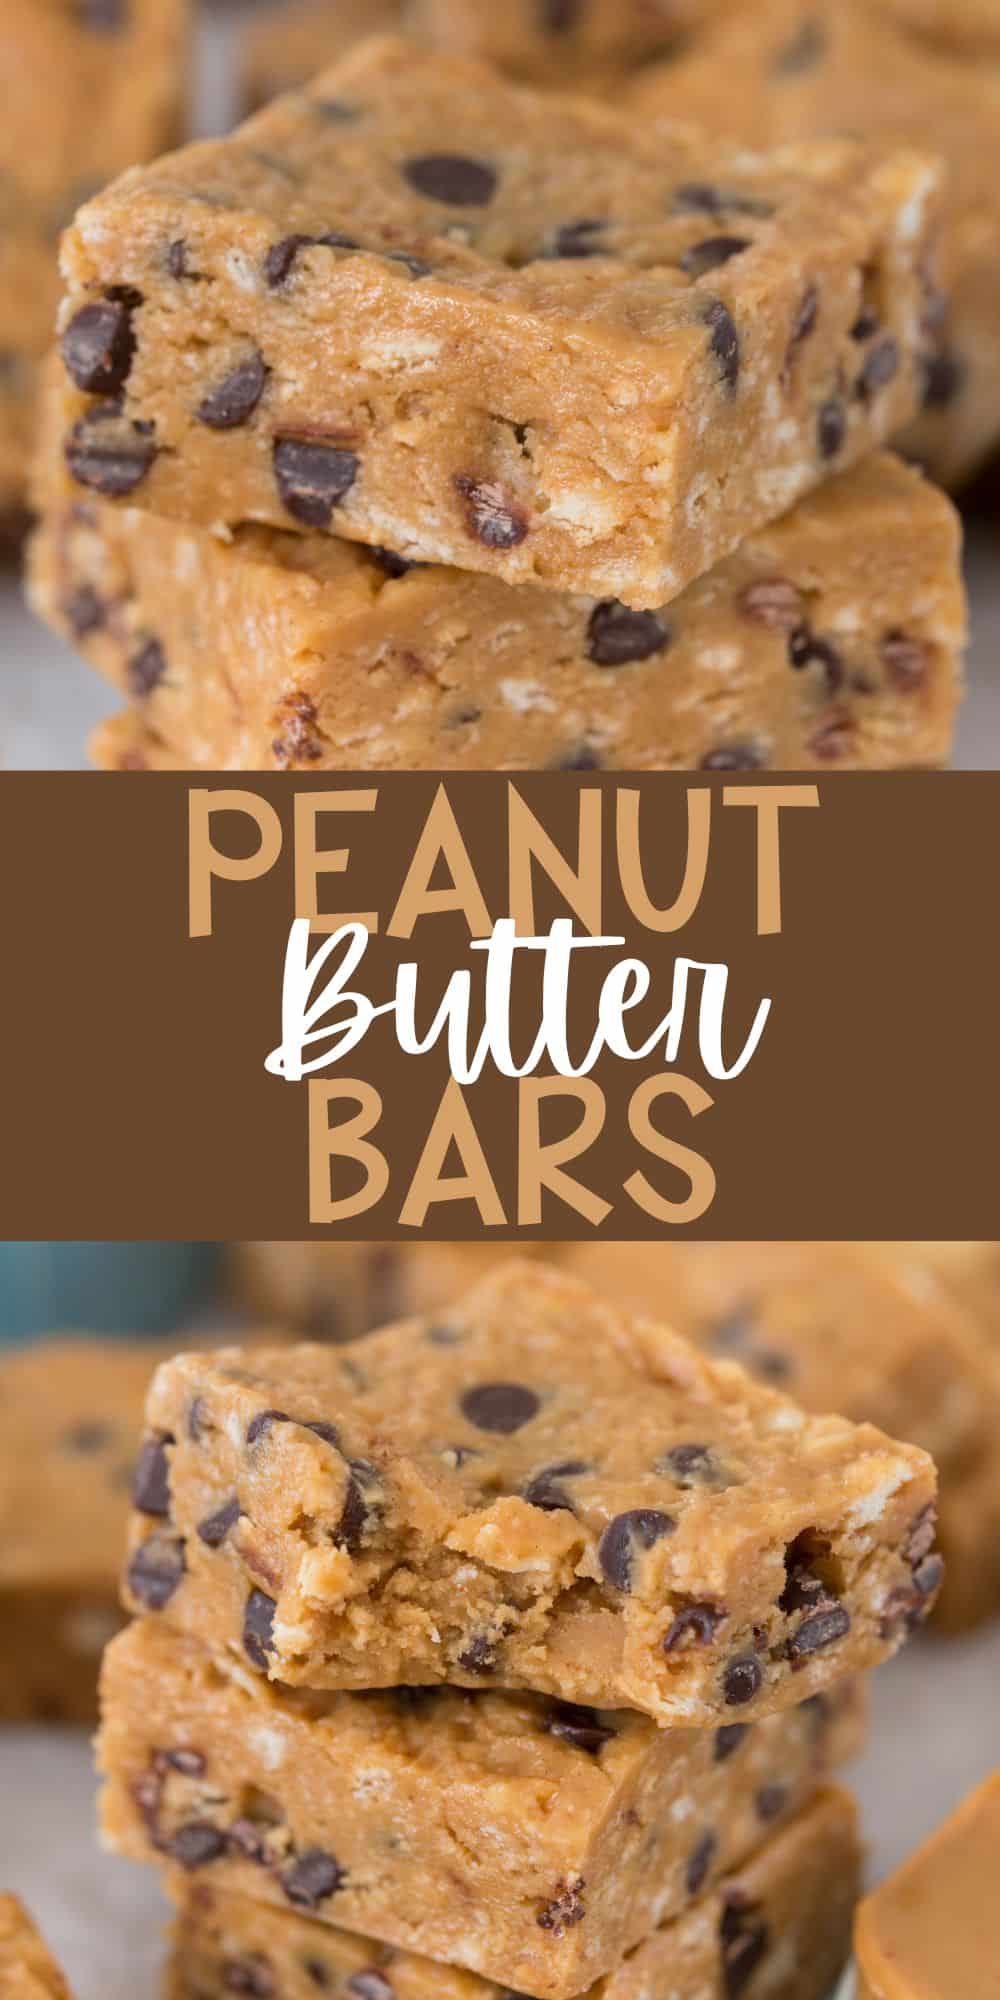 two photos of stacked peanut butter bars with chocolate chips baked in with words on the image.